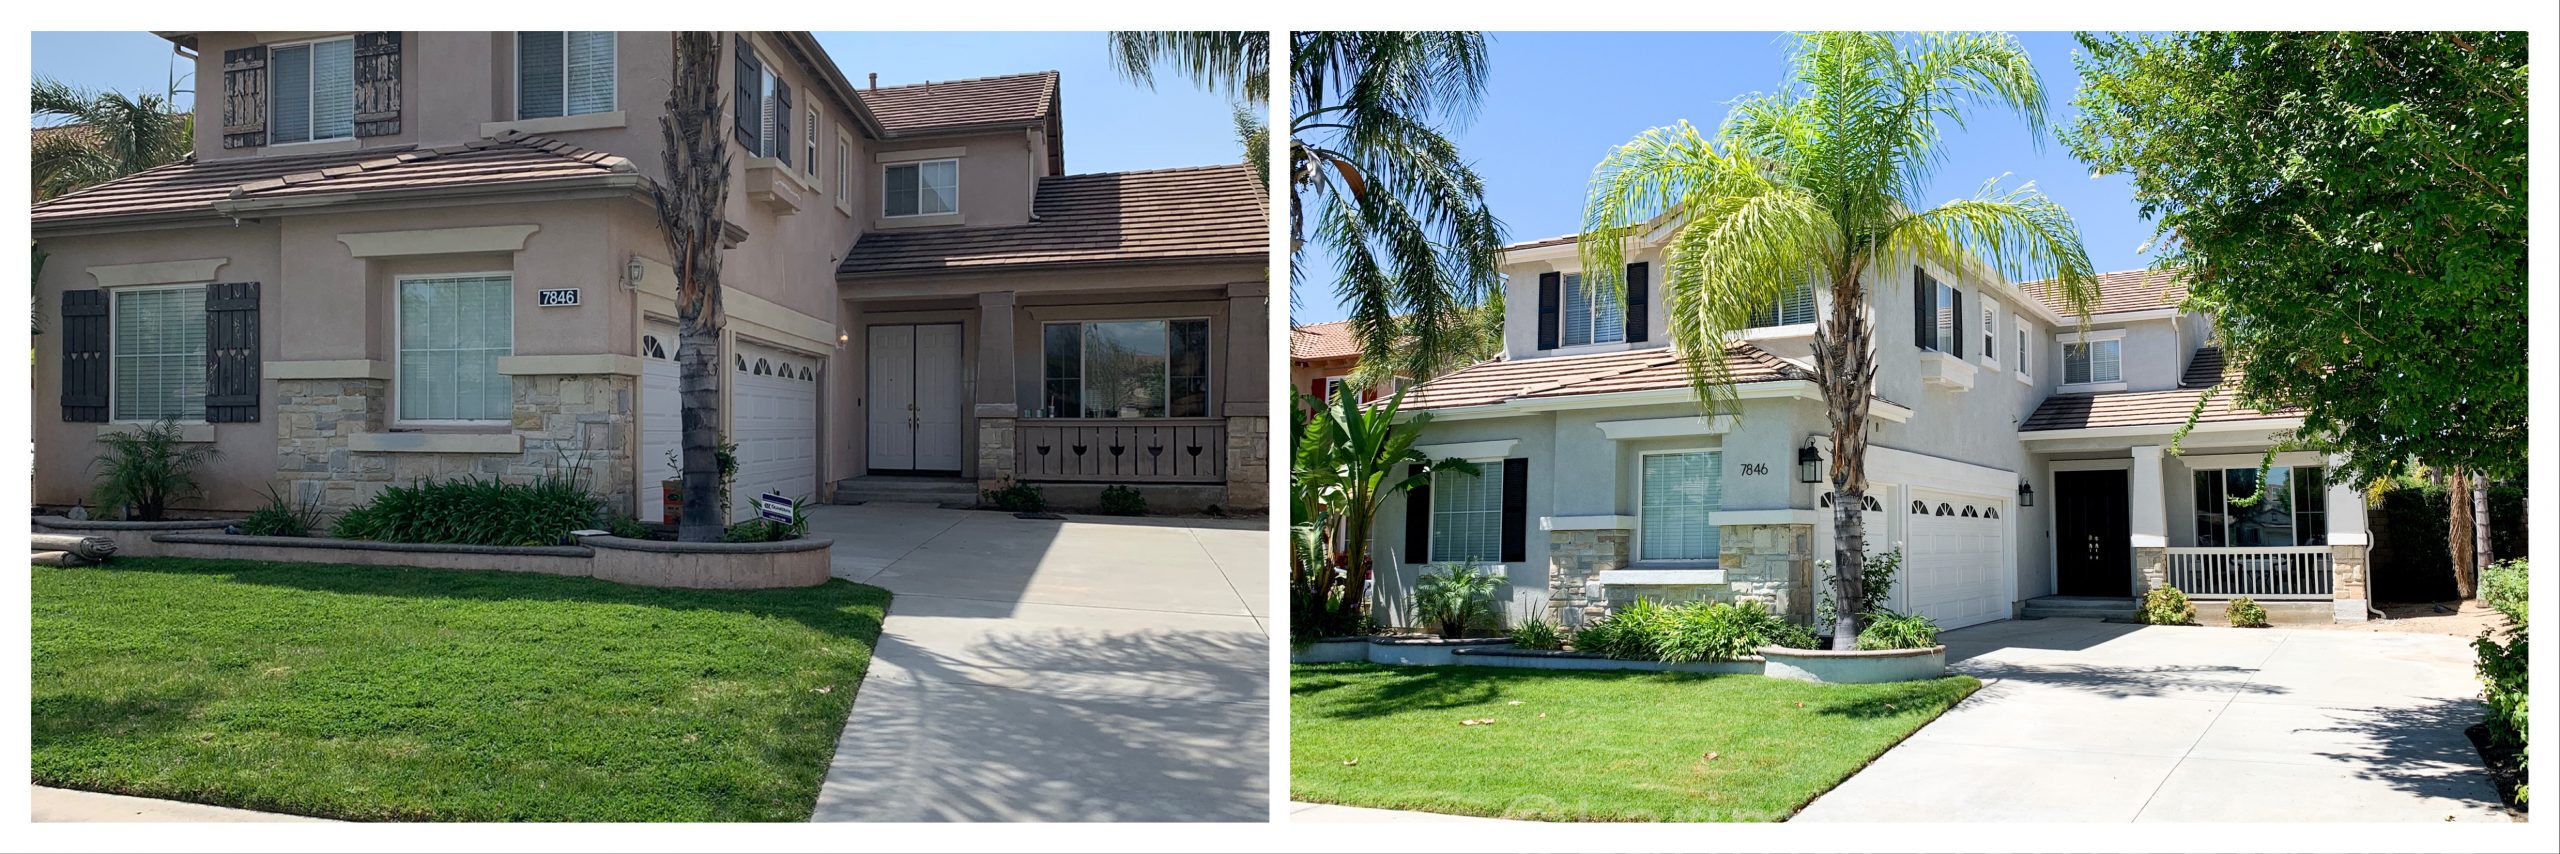 Before and After Curb Appeal Makeover